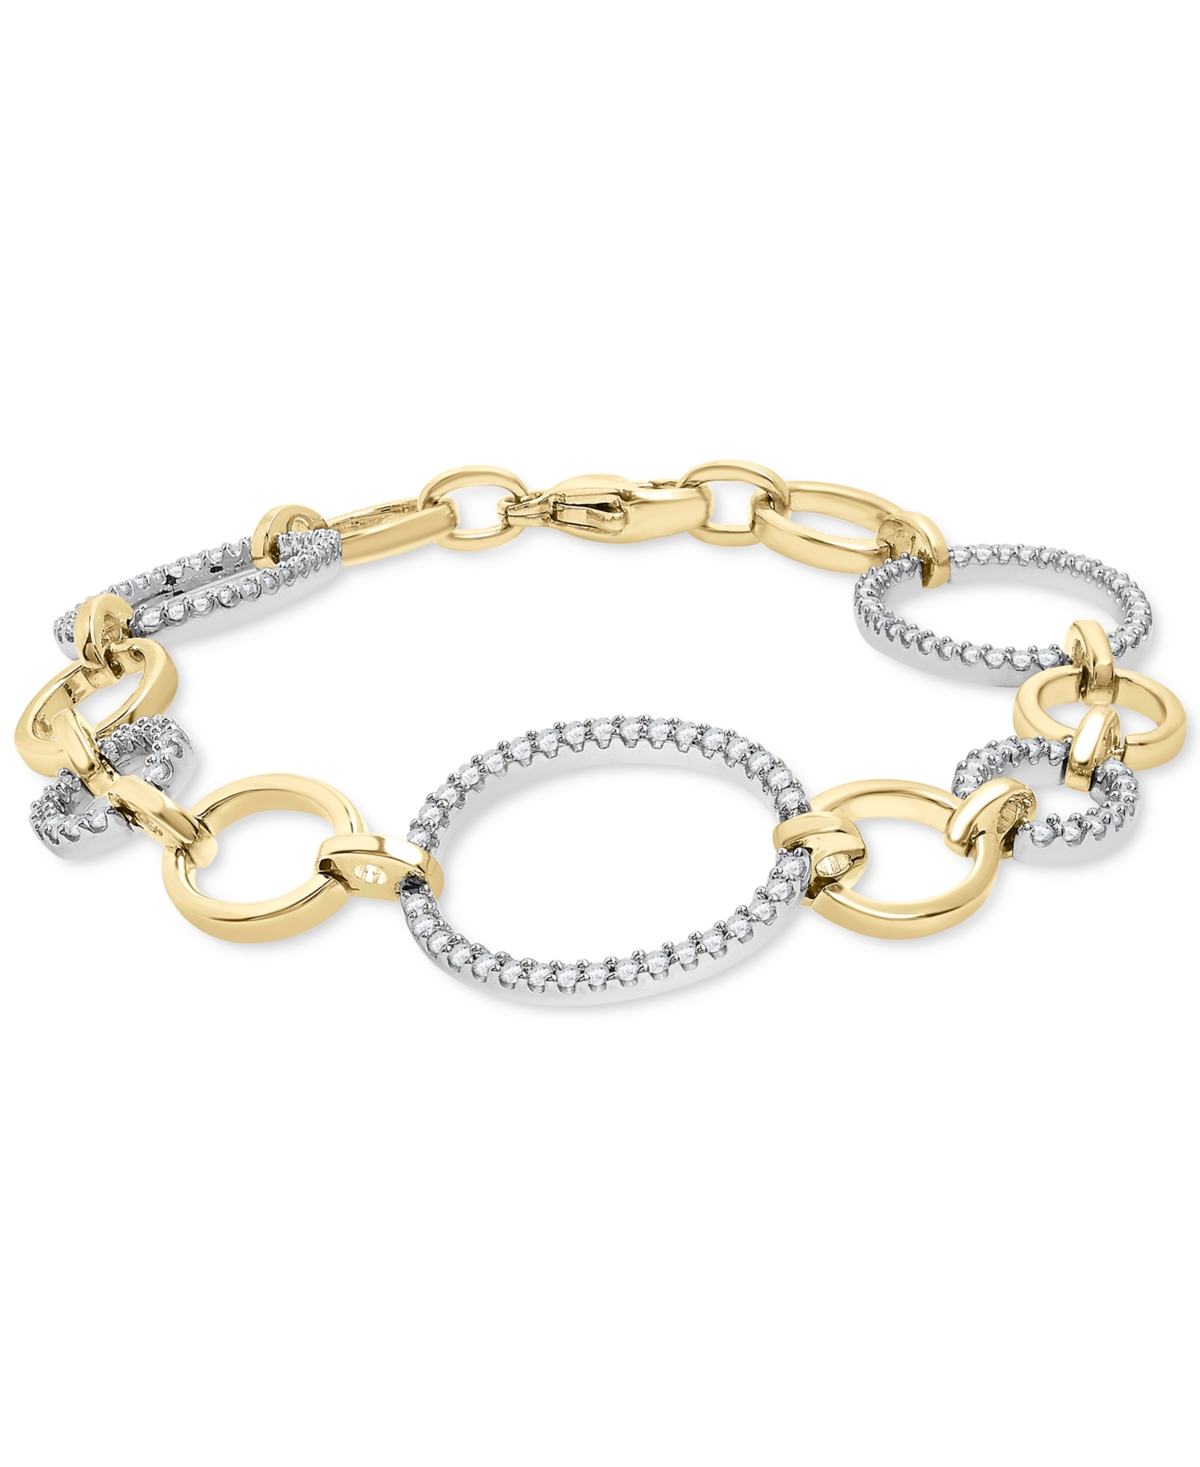 Diamond Oval Link Bracelet (1 ct. t.w.) in 14k Gold-Plated Sterling Silver, Created for Macy's - Gold-Plated Sterling Silver